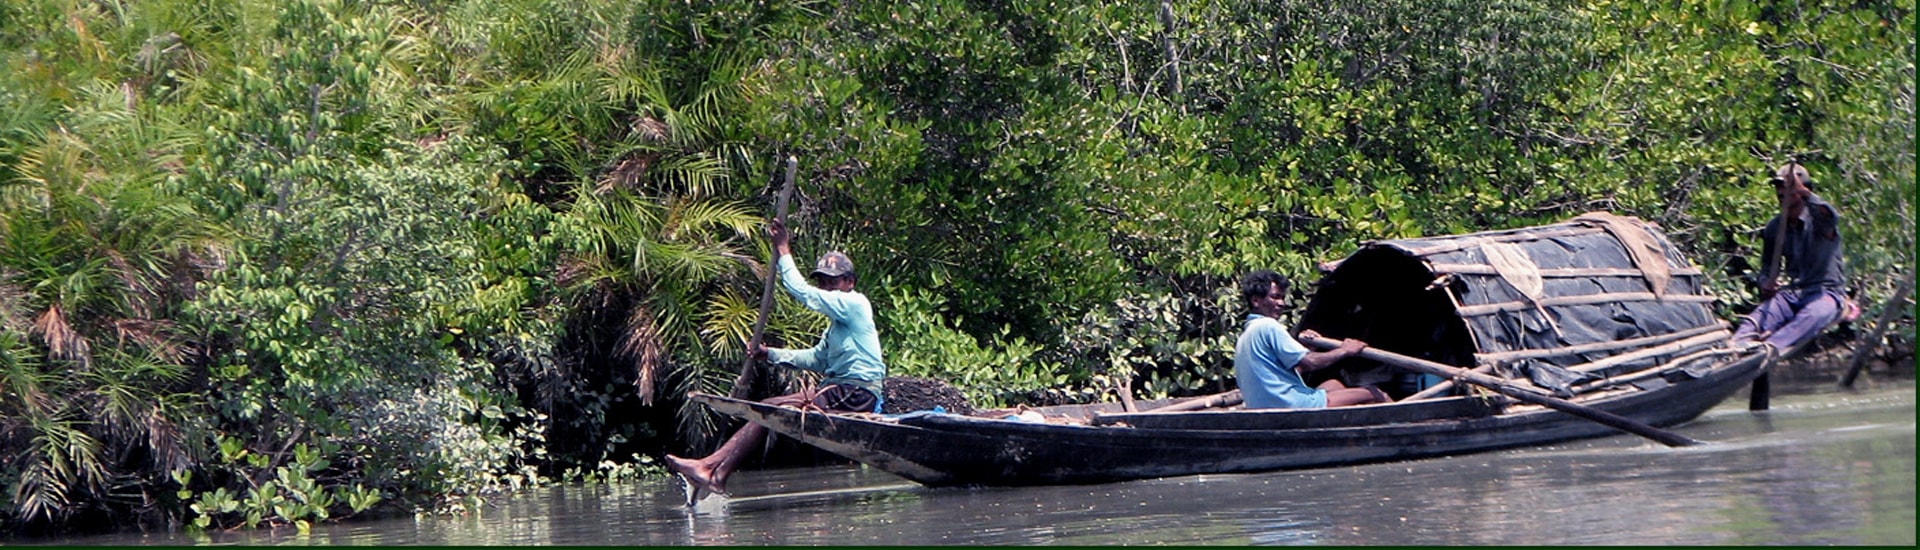 5 Facts about Super Cyclone Amphan and how it affects Sundarban Tourism